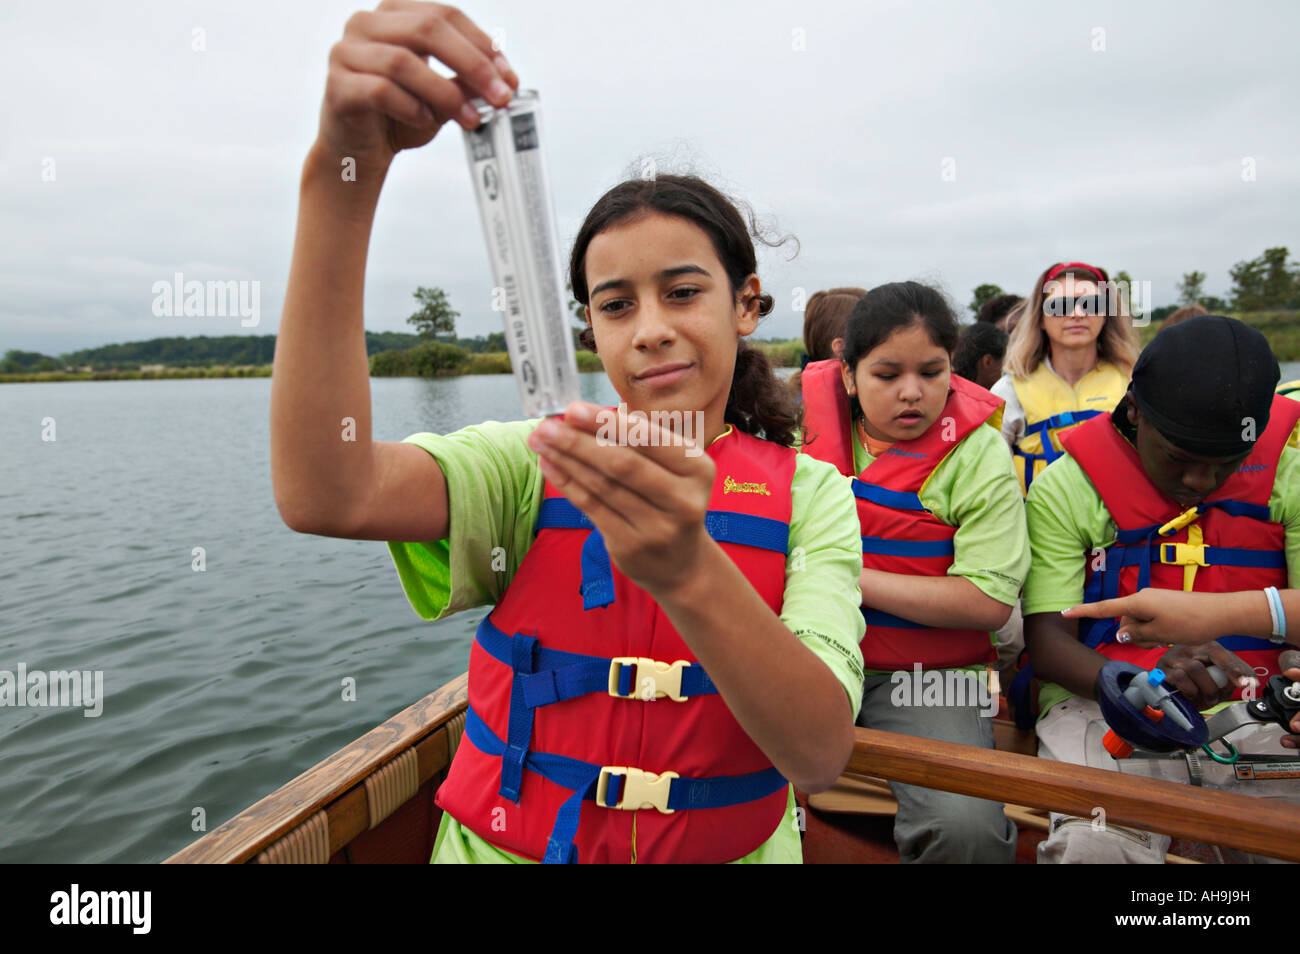 PRESERVES Libertyville Illinois Female student read wind meter students conduct water quality tests in lake ScienceFirst Stock Photo